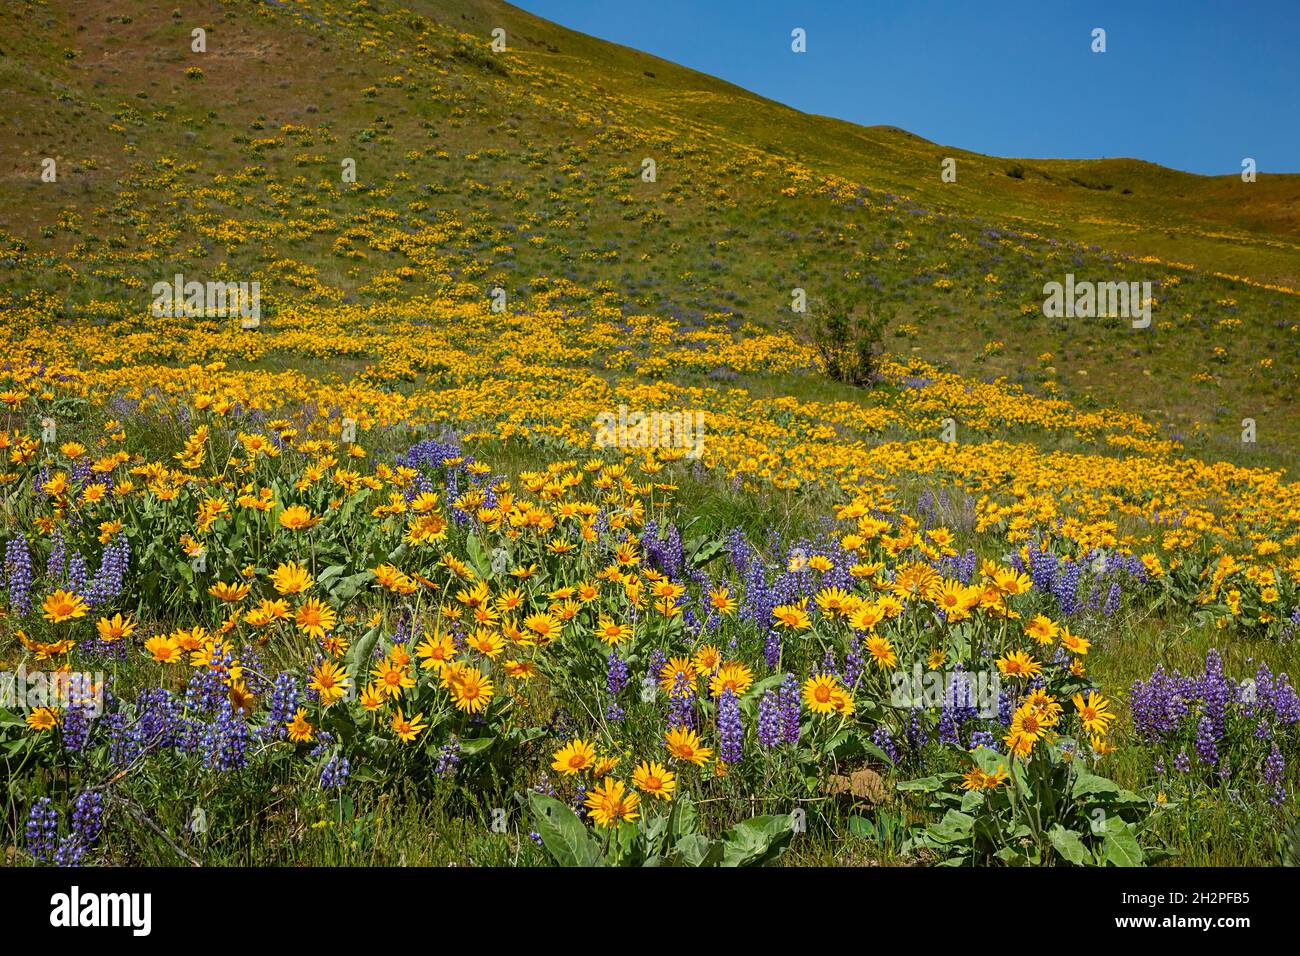 WA19707-00...WASHINGTON - Balsamroot and lupine blooming along the Sage Hills Trail above the town of Wenatchee. Stock Photo